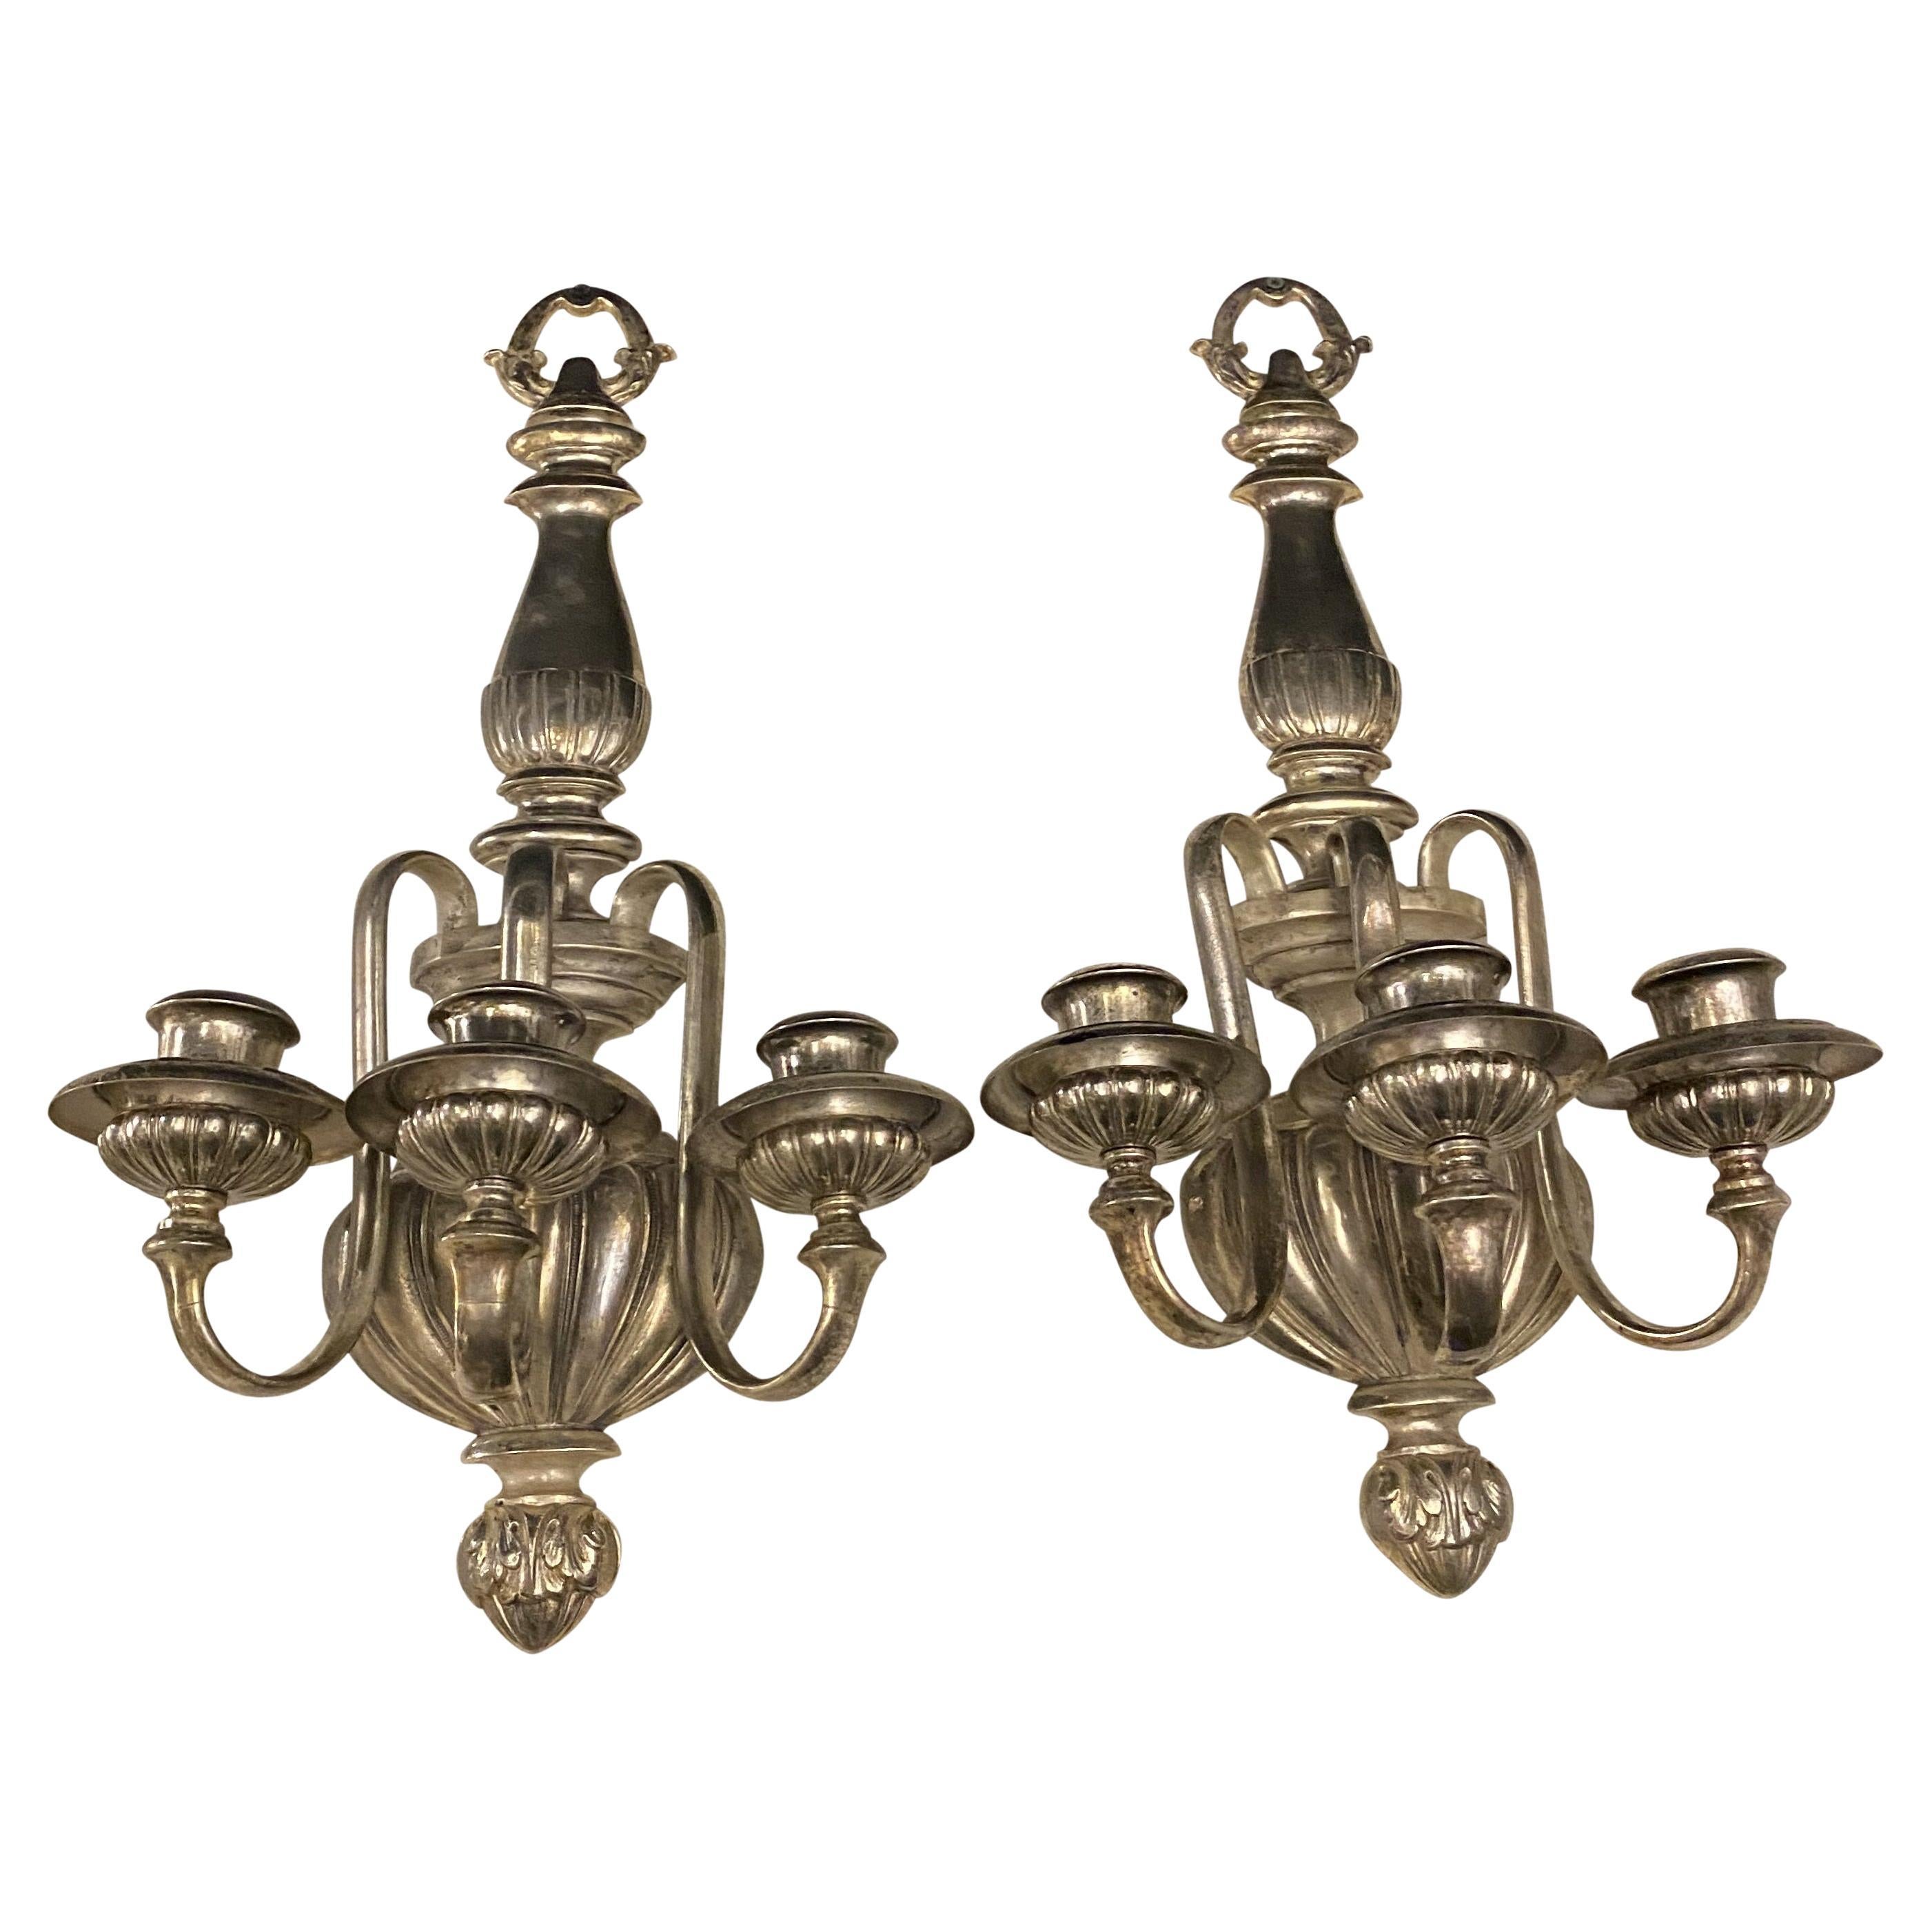 1920s Large Caldwell Silver Plated Sconces with thee lights